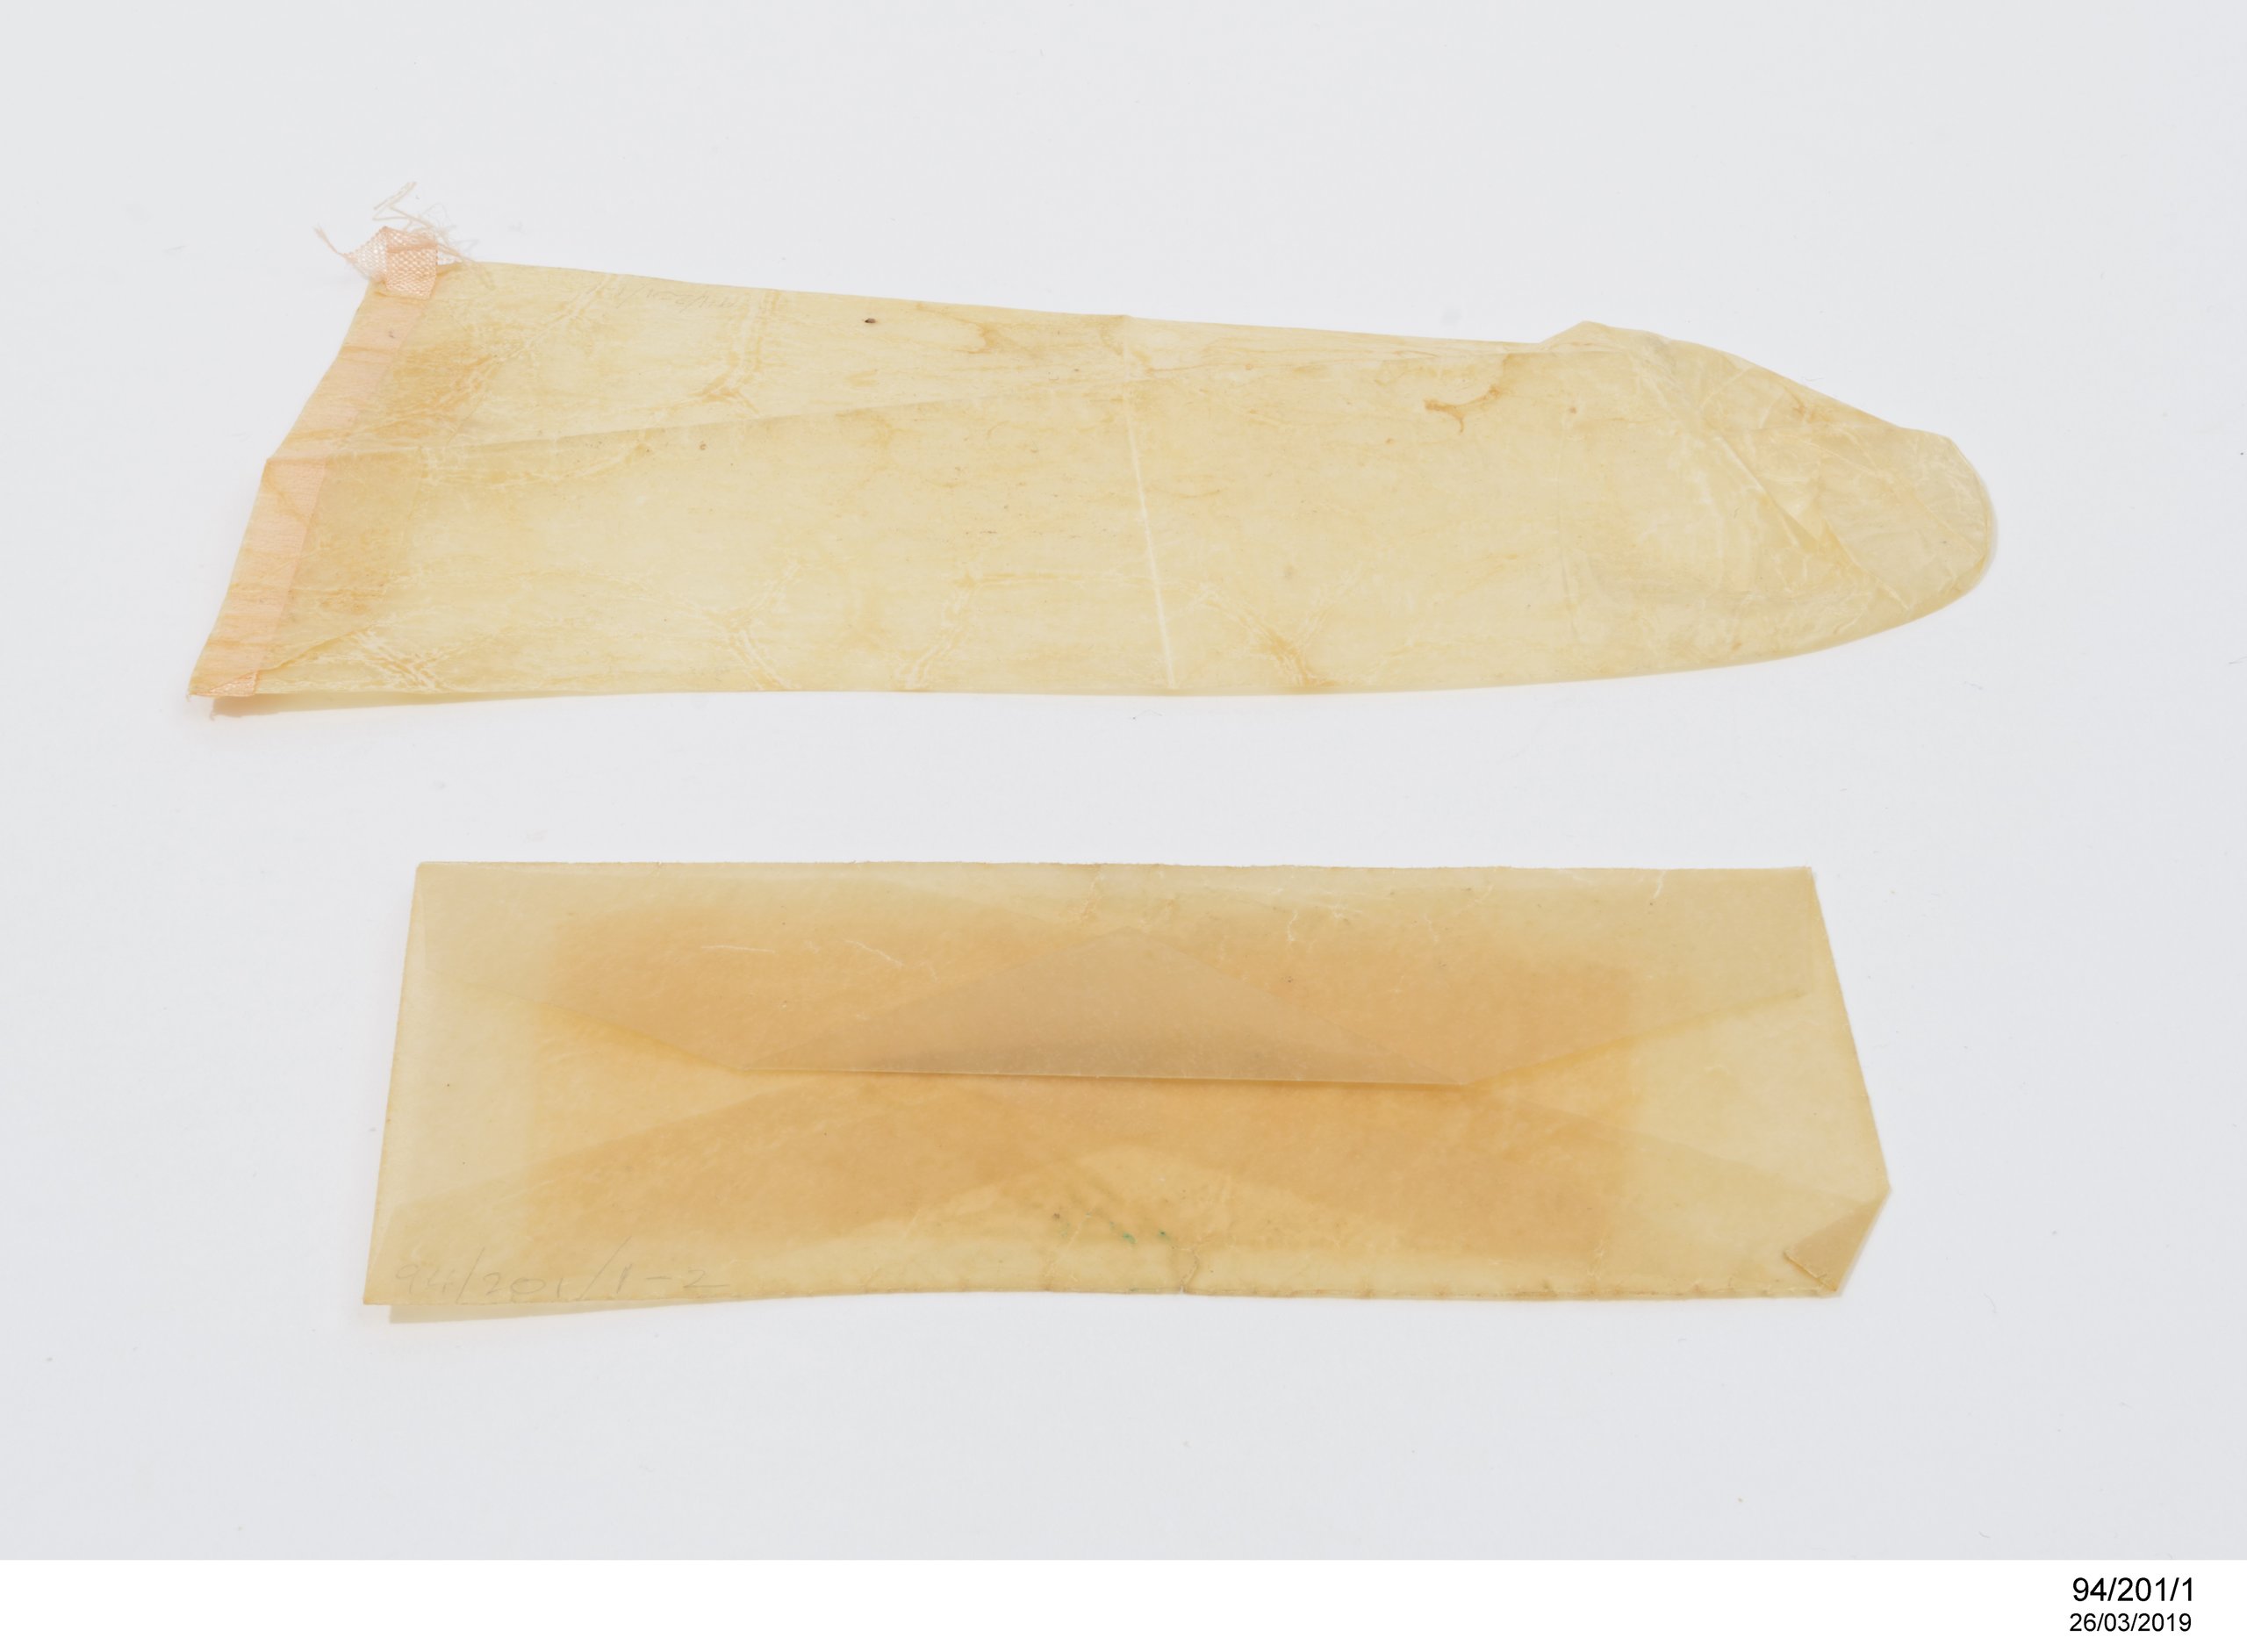 Sheep gut condom and envelope